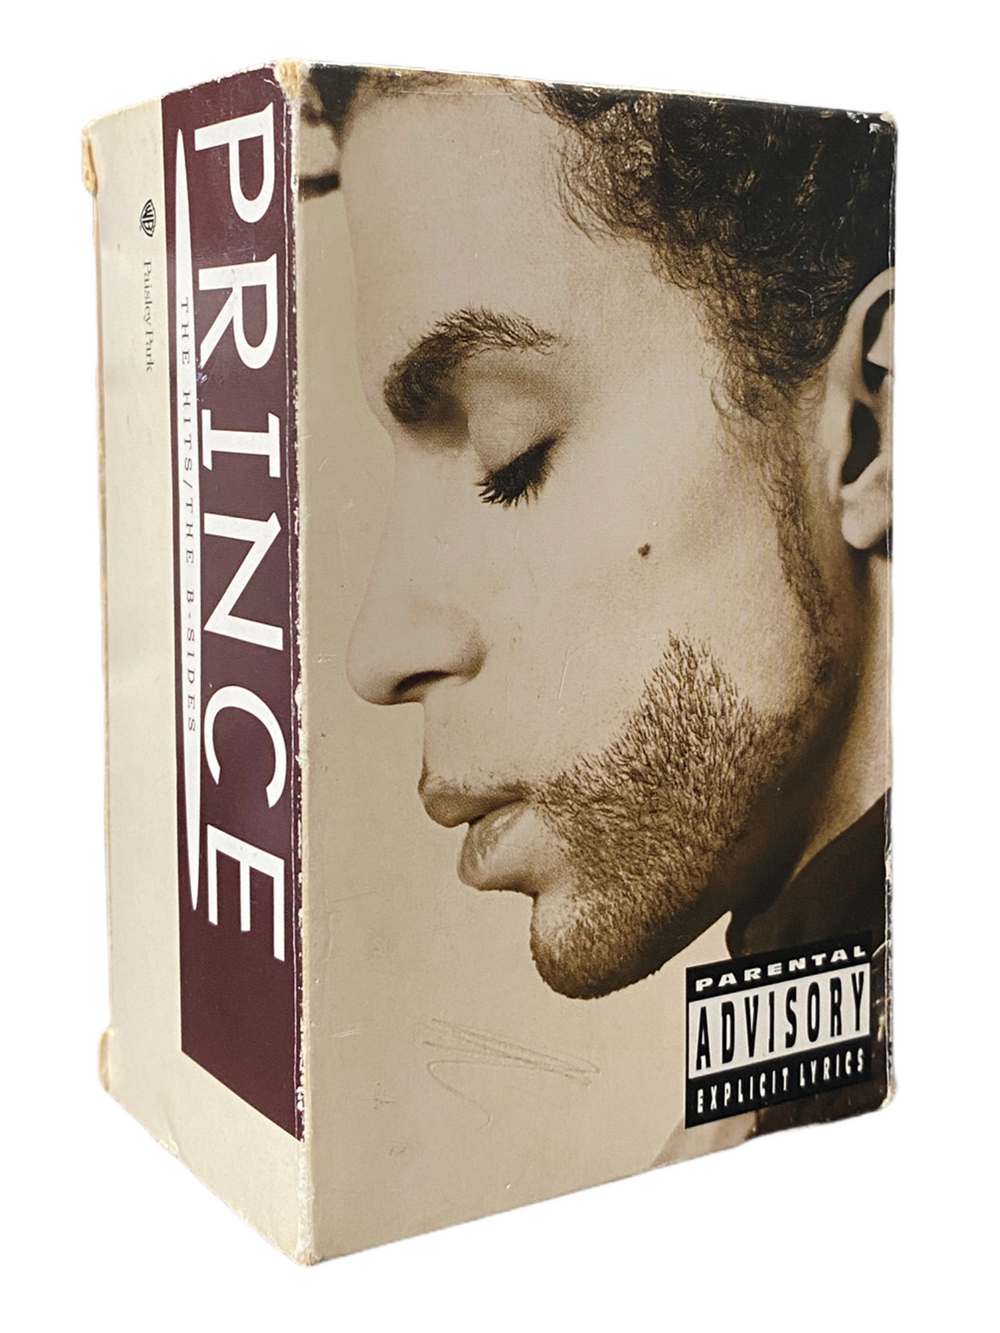 Prince The Hits The B-Sides Original  Release Tape Cassette Box Set